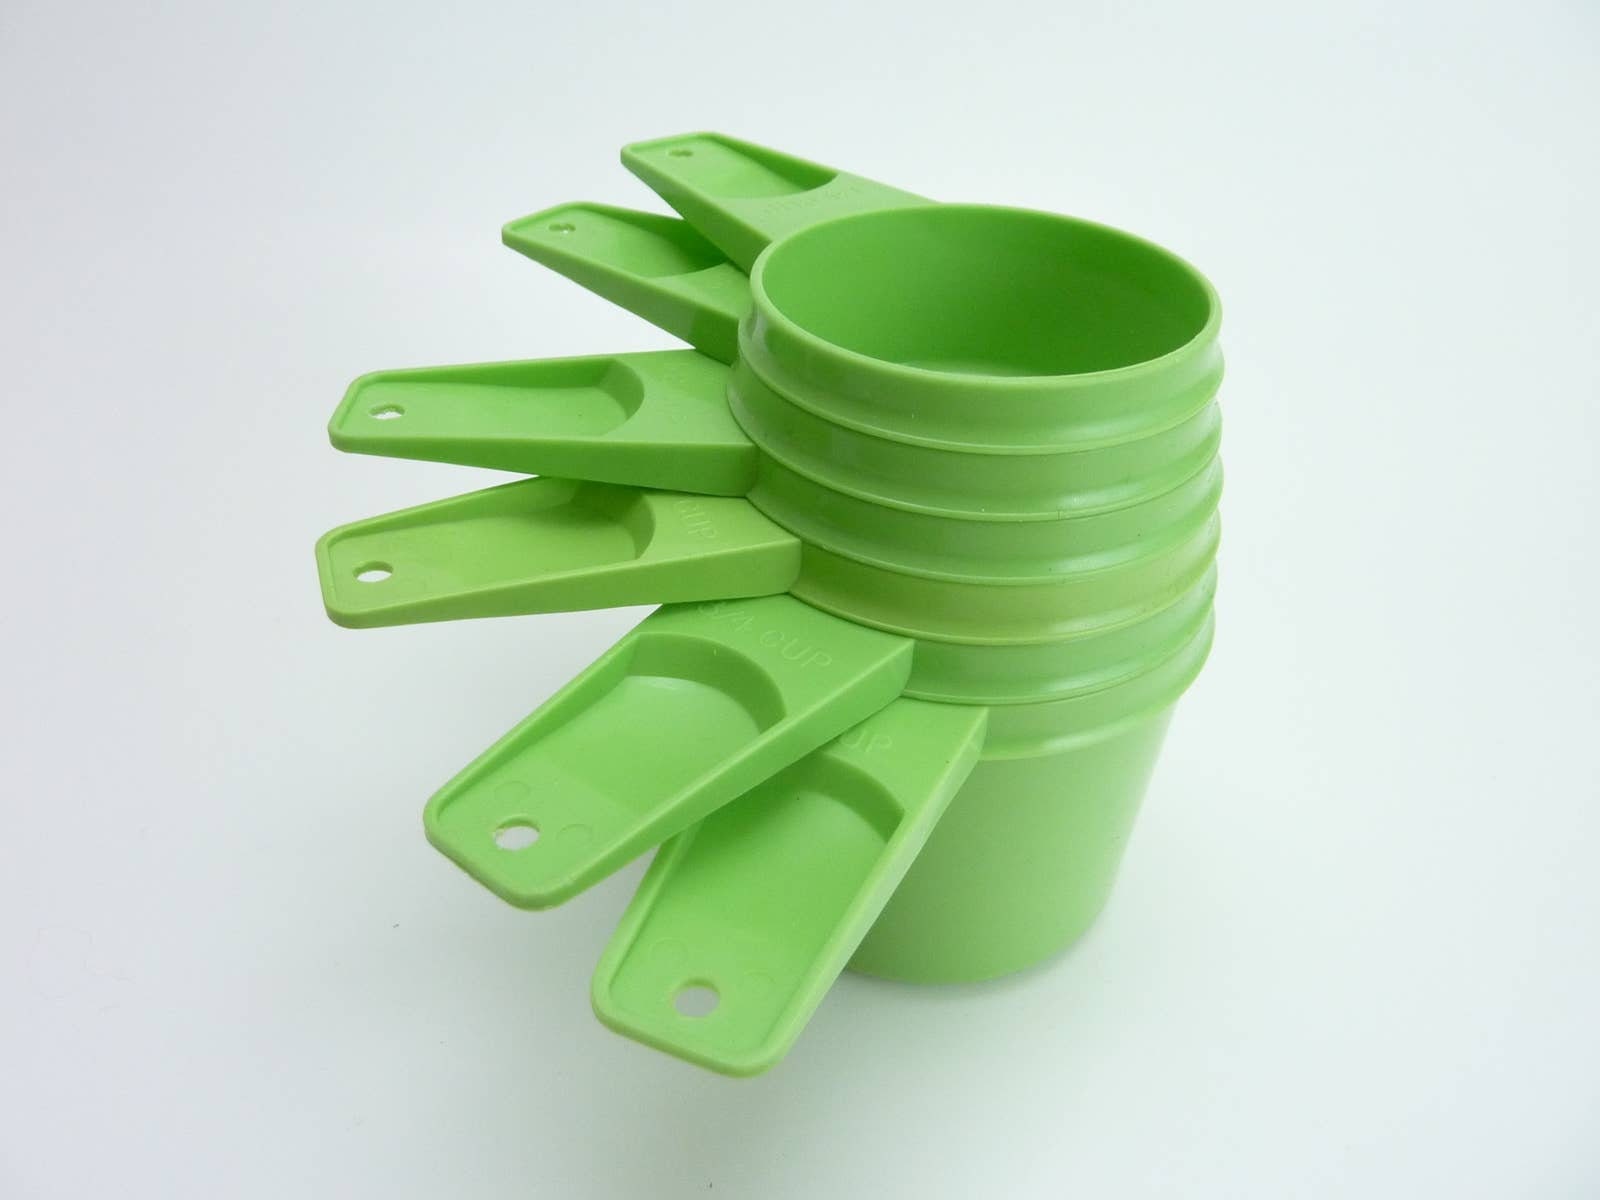 NEW Tupperware Measuring Cups and Spoons Set Measuring Mates 12 pc Set